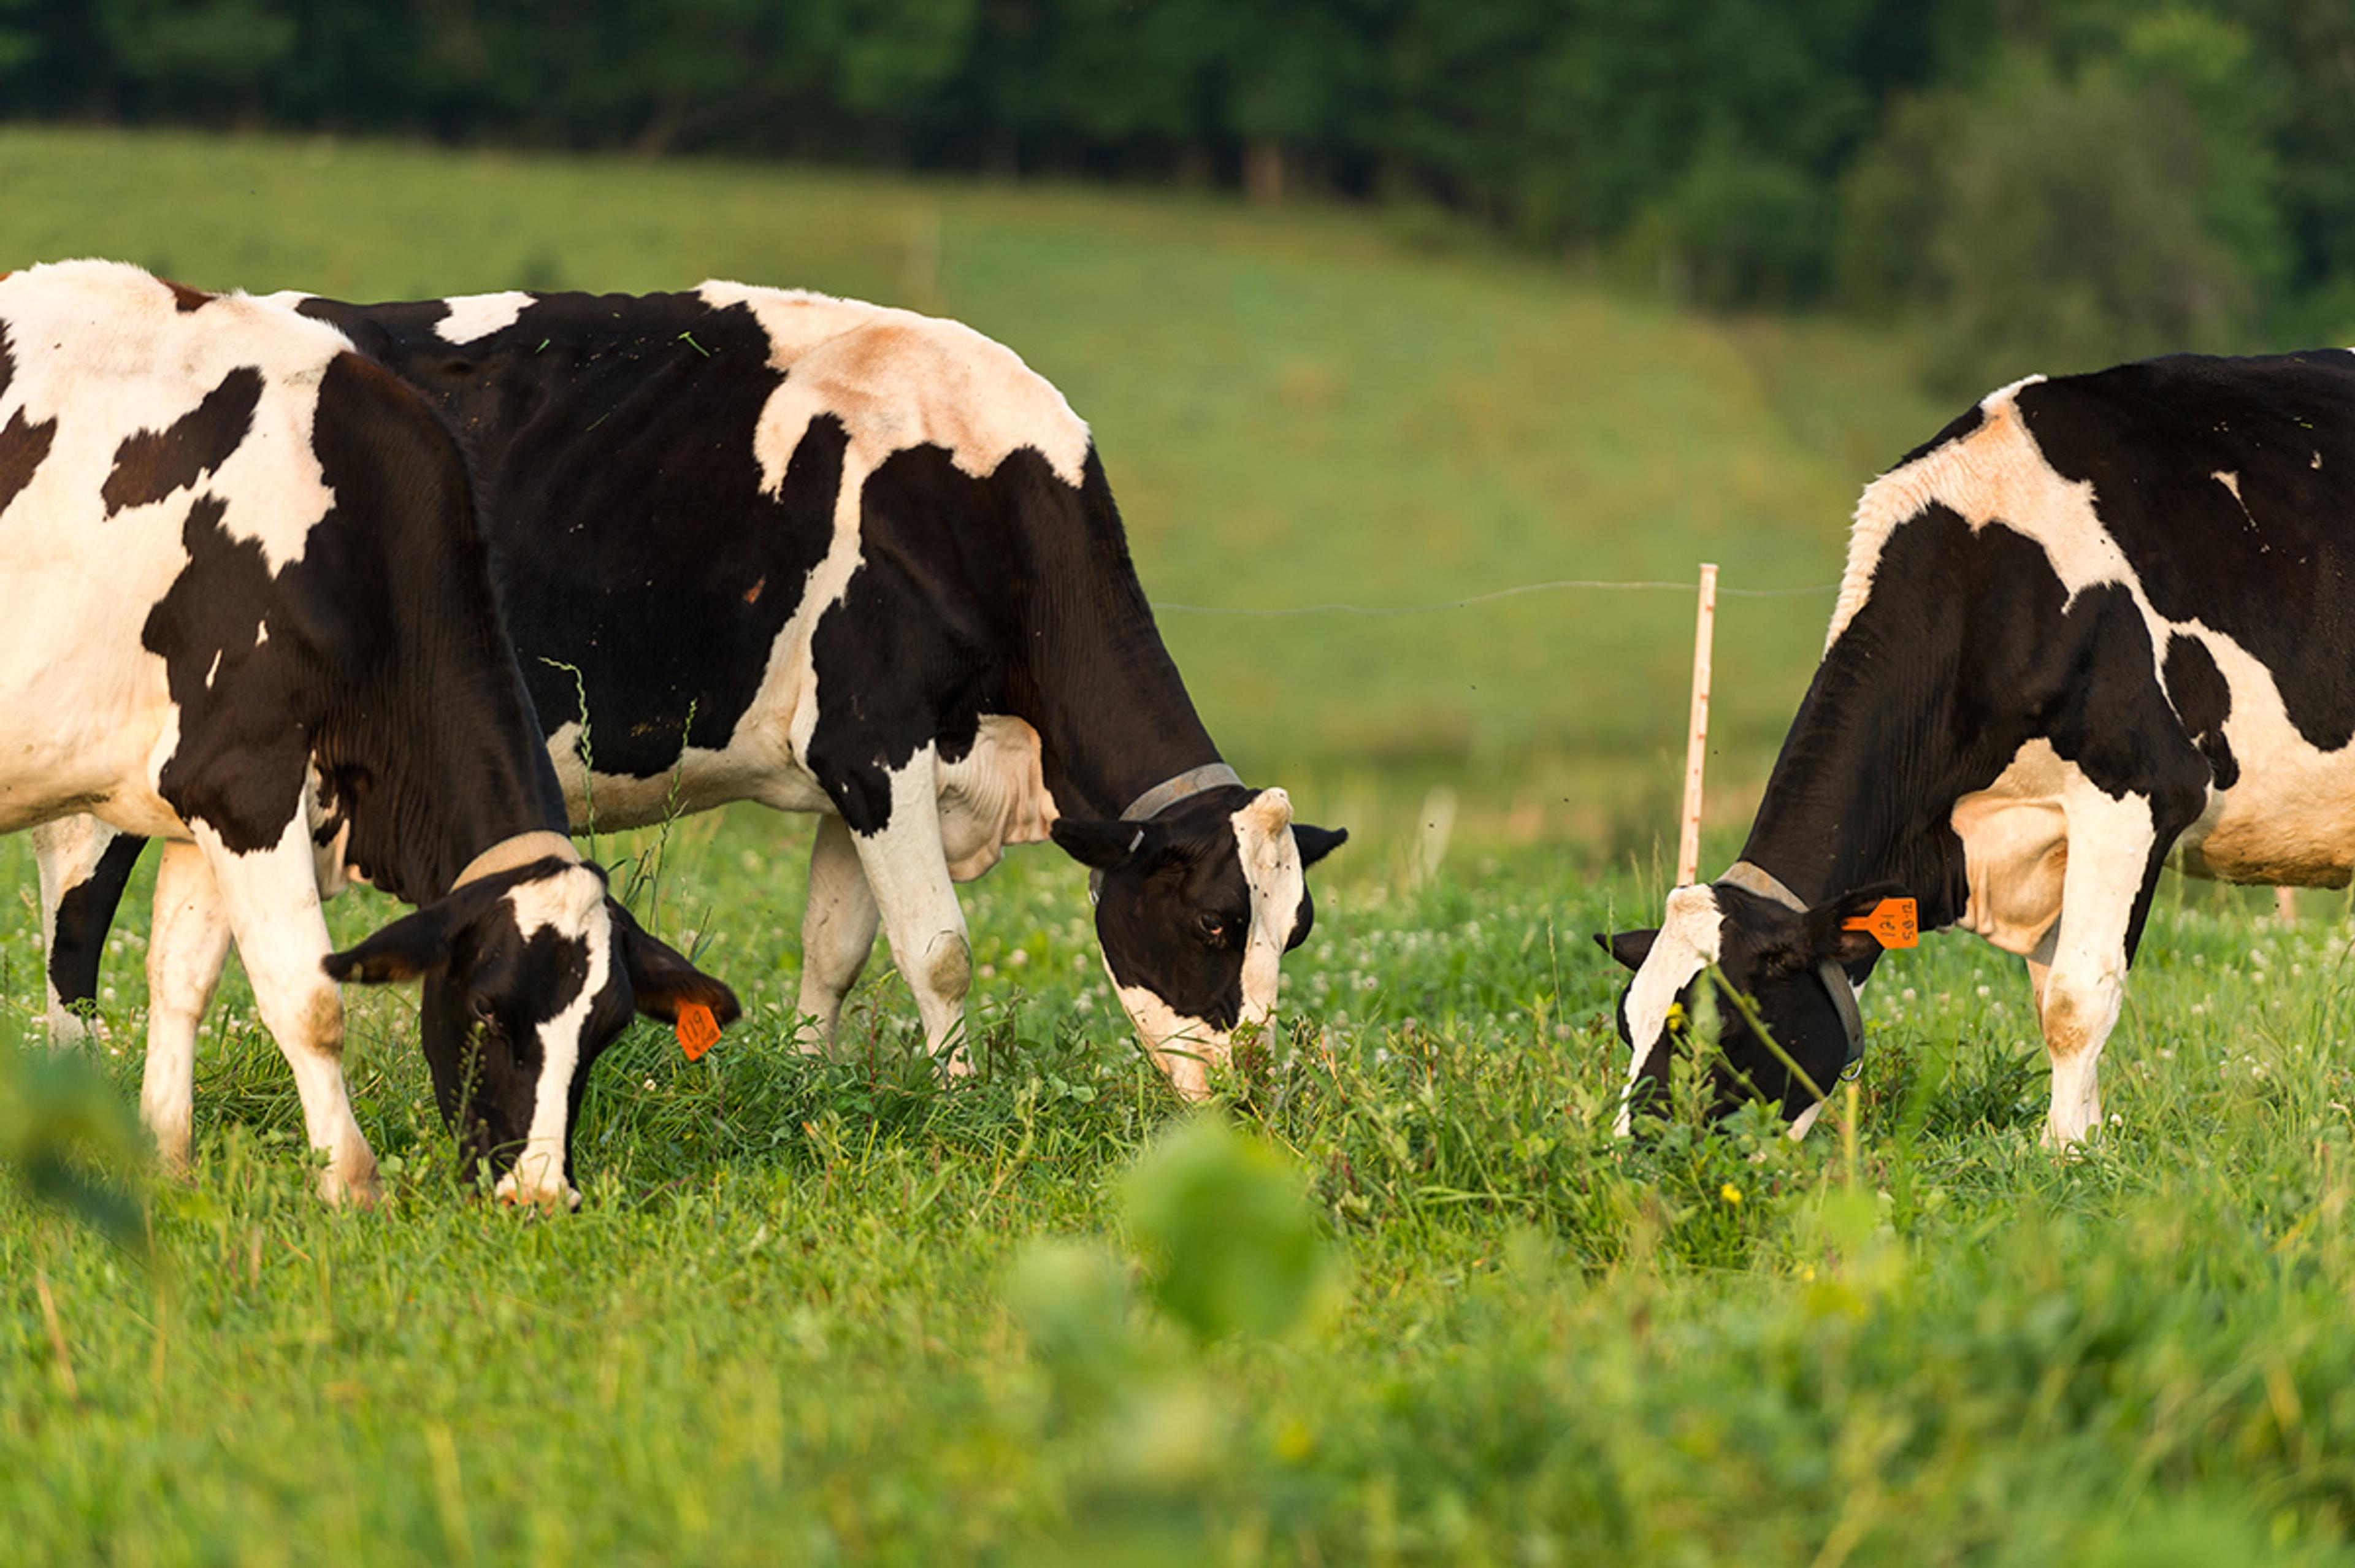 Cows graze on a green pasture.